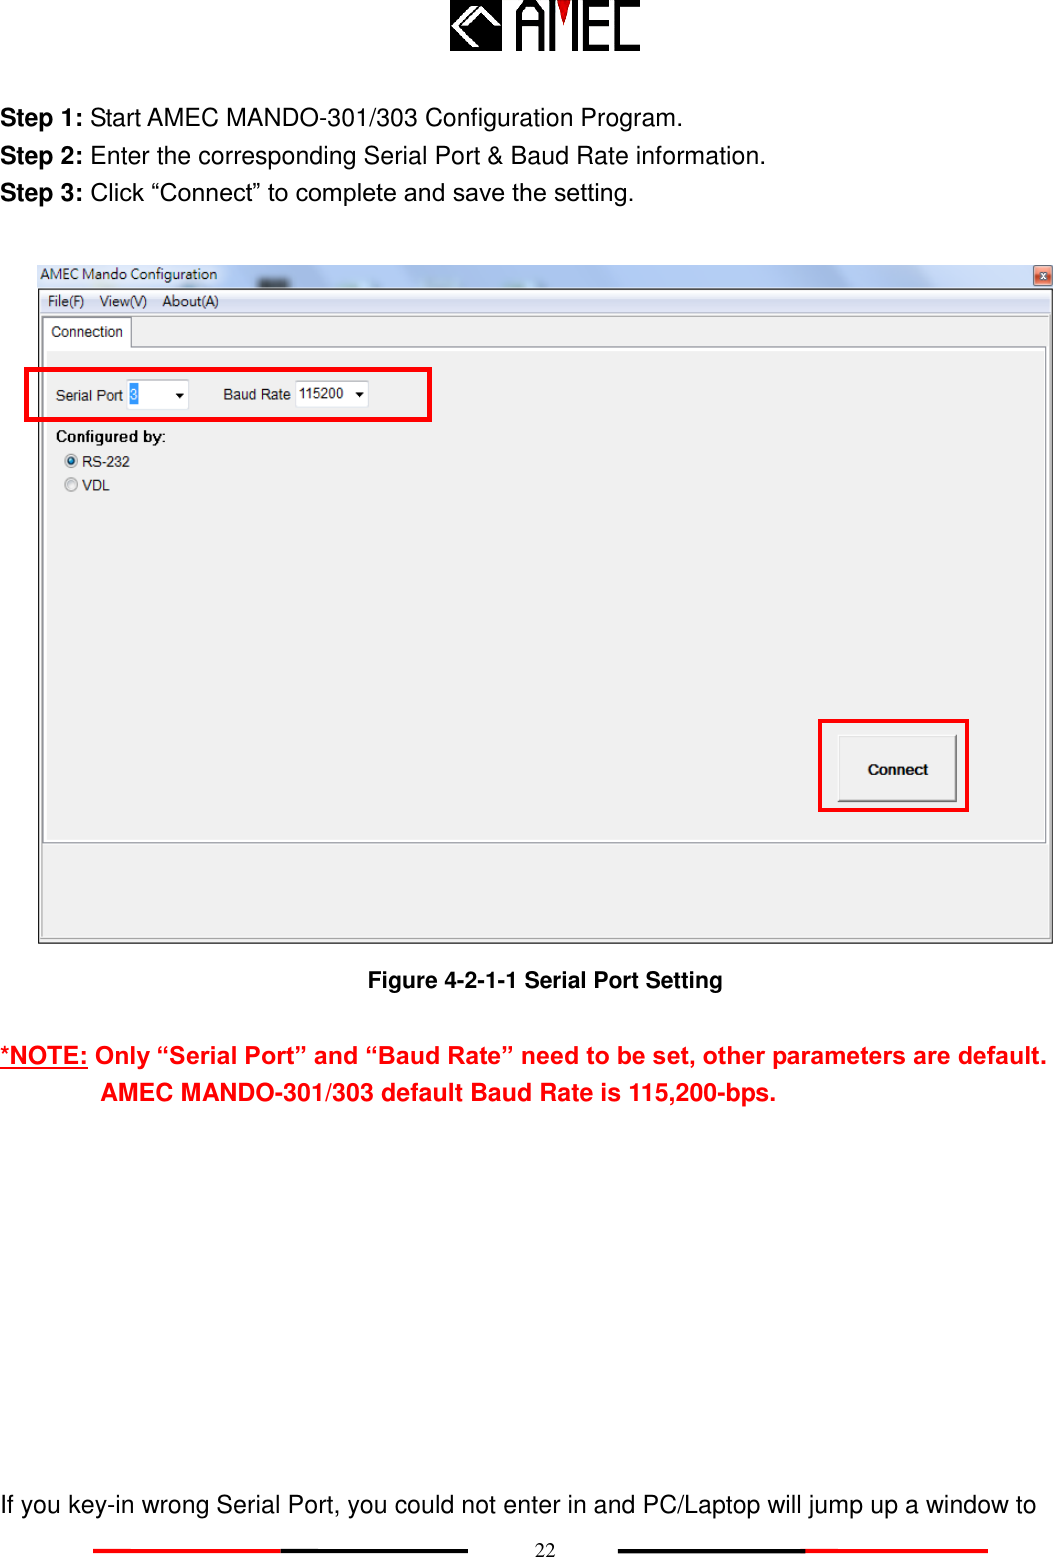    22 Step 1: Start AMEC MANDO-301/303 Configuration Program. Step 2: Enter the corresponding Serial Port &amp; Baud Rate information. Step 3: Click “Connect” to complete and save the setting.   Figure 4-2-1-1 Serial Port Setting  *NOTE: Only “Serial Port” and “Baud Rate” need to be set, other parameters are default. AMEC MANDO-301/303 default Baud Rate is 115,200-bps.           If you key-in wrong Serial Port, you could not enter in and PC/Laptop will jump up a window to 